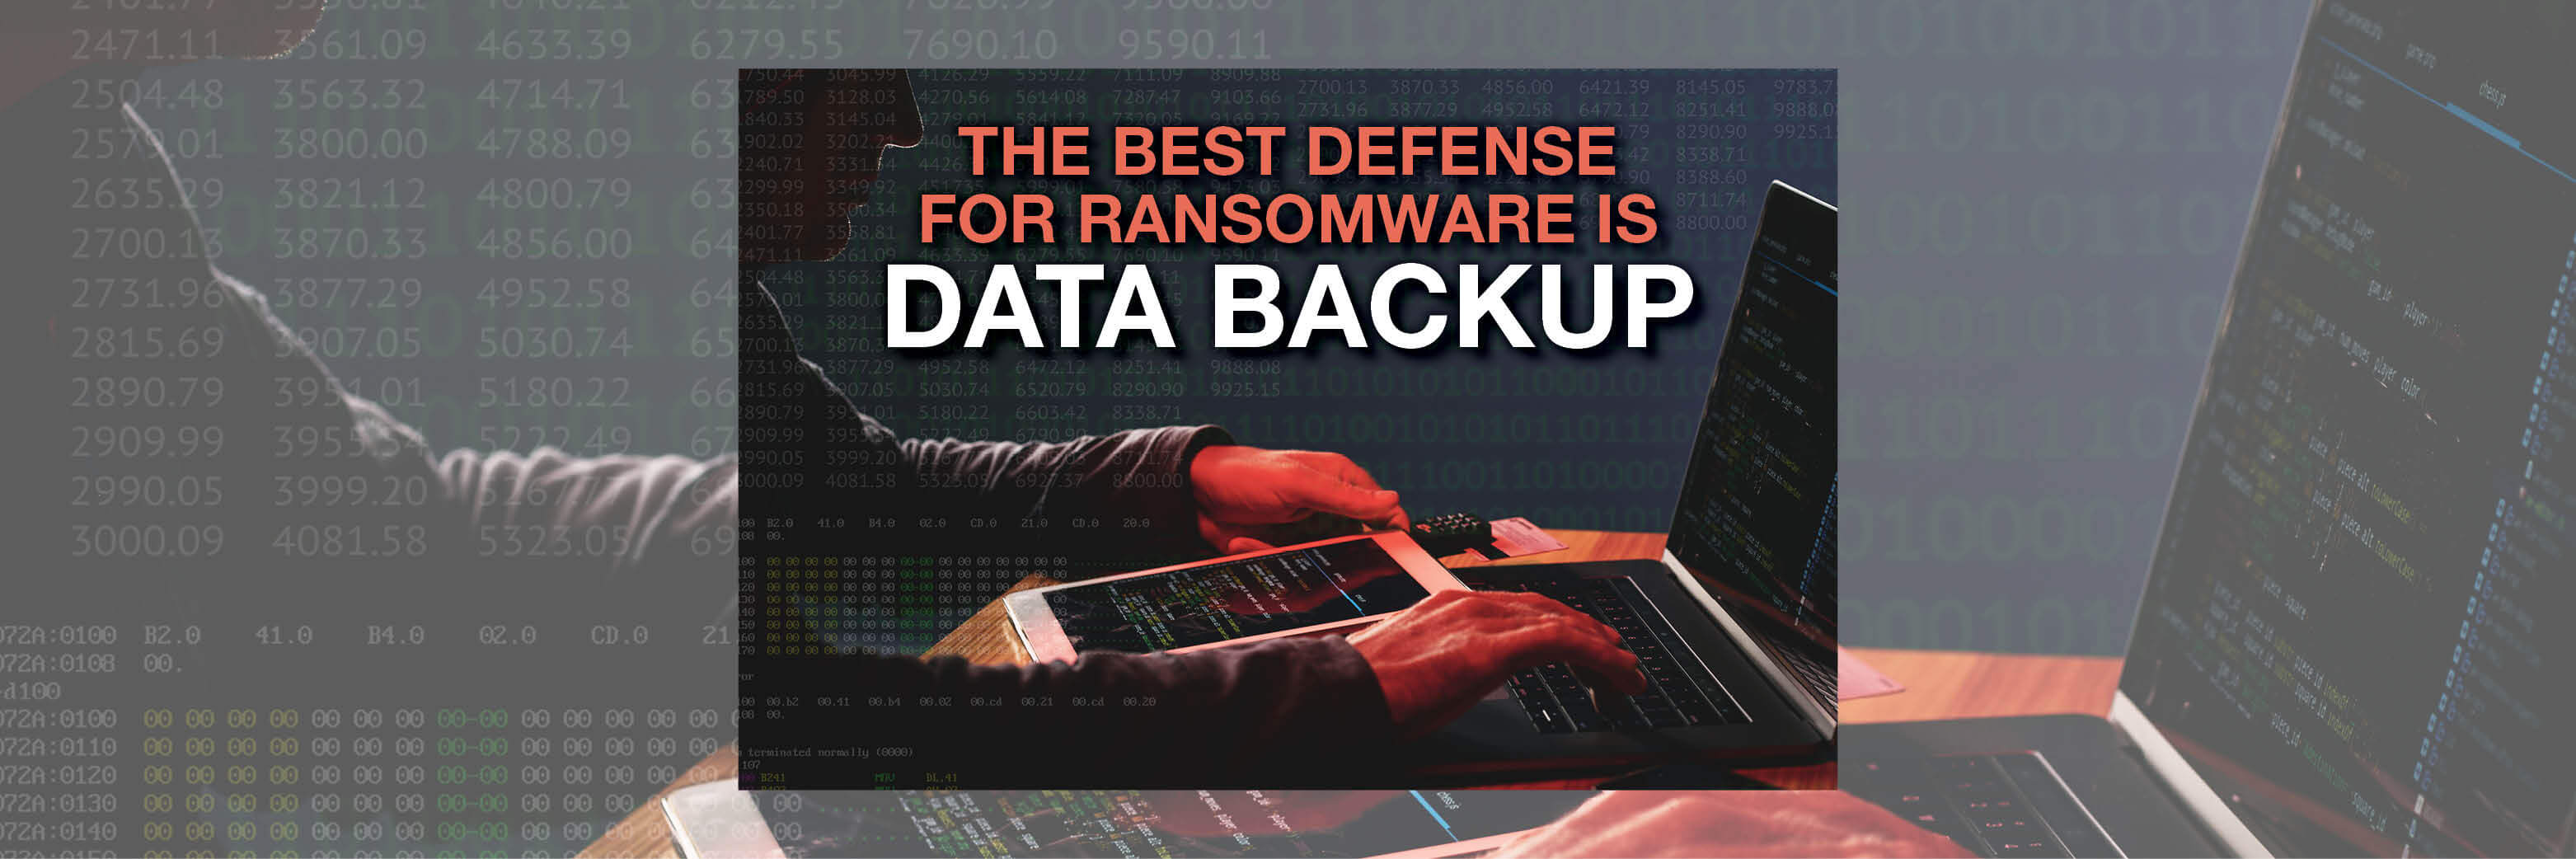 The Best Defense for Ransomware is Data Backup